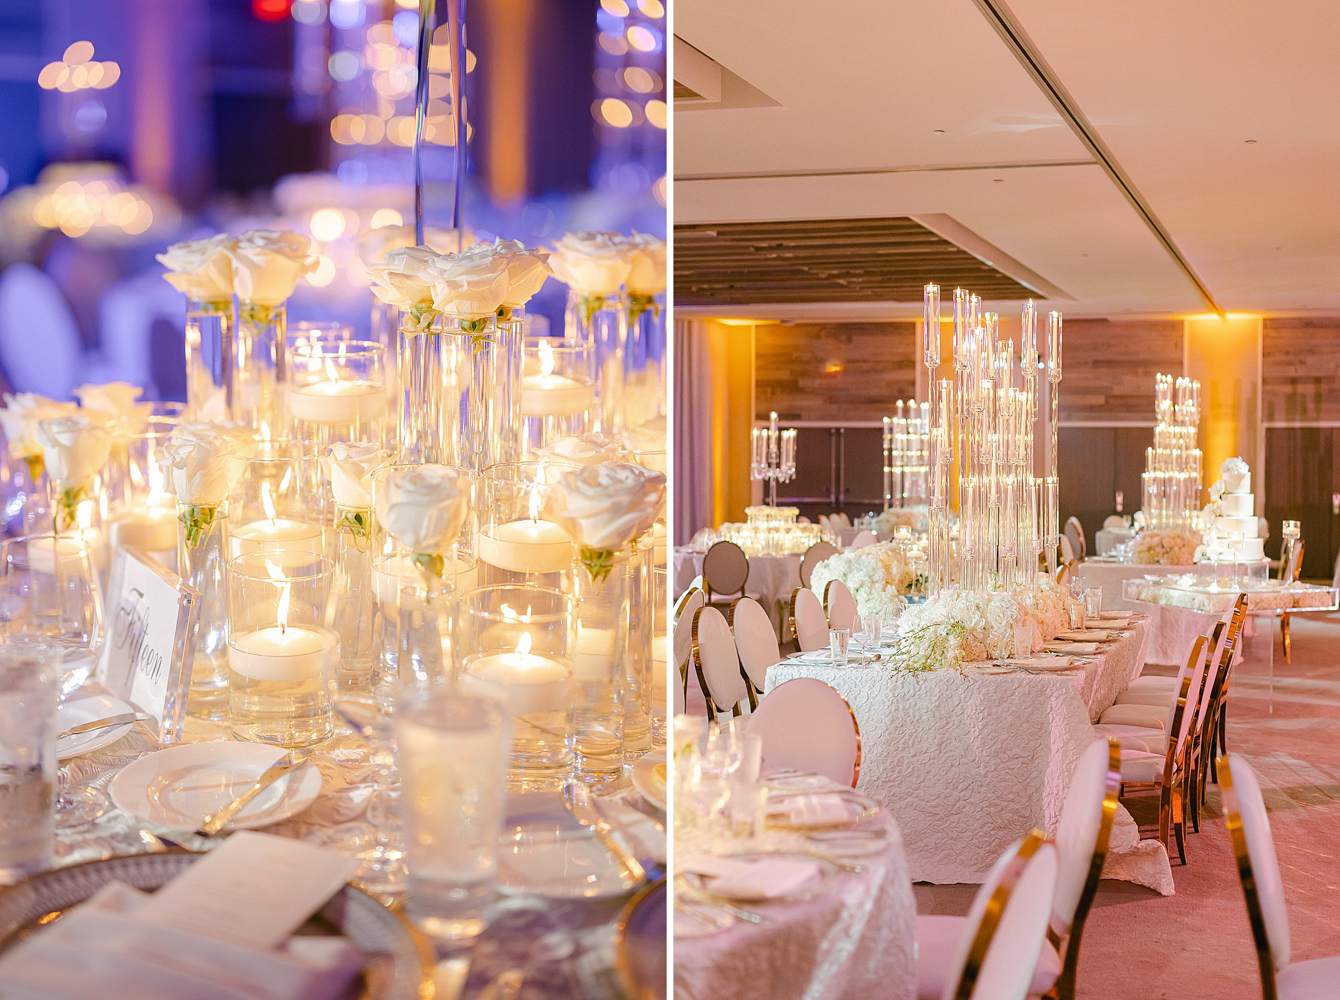 Reception decor details at the Terra ballroom. White roses in tall glass cylinders and gold and ivory circle back chairs